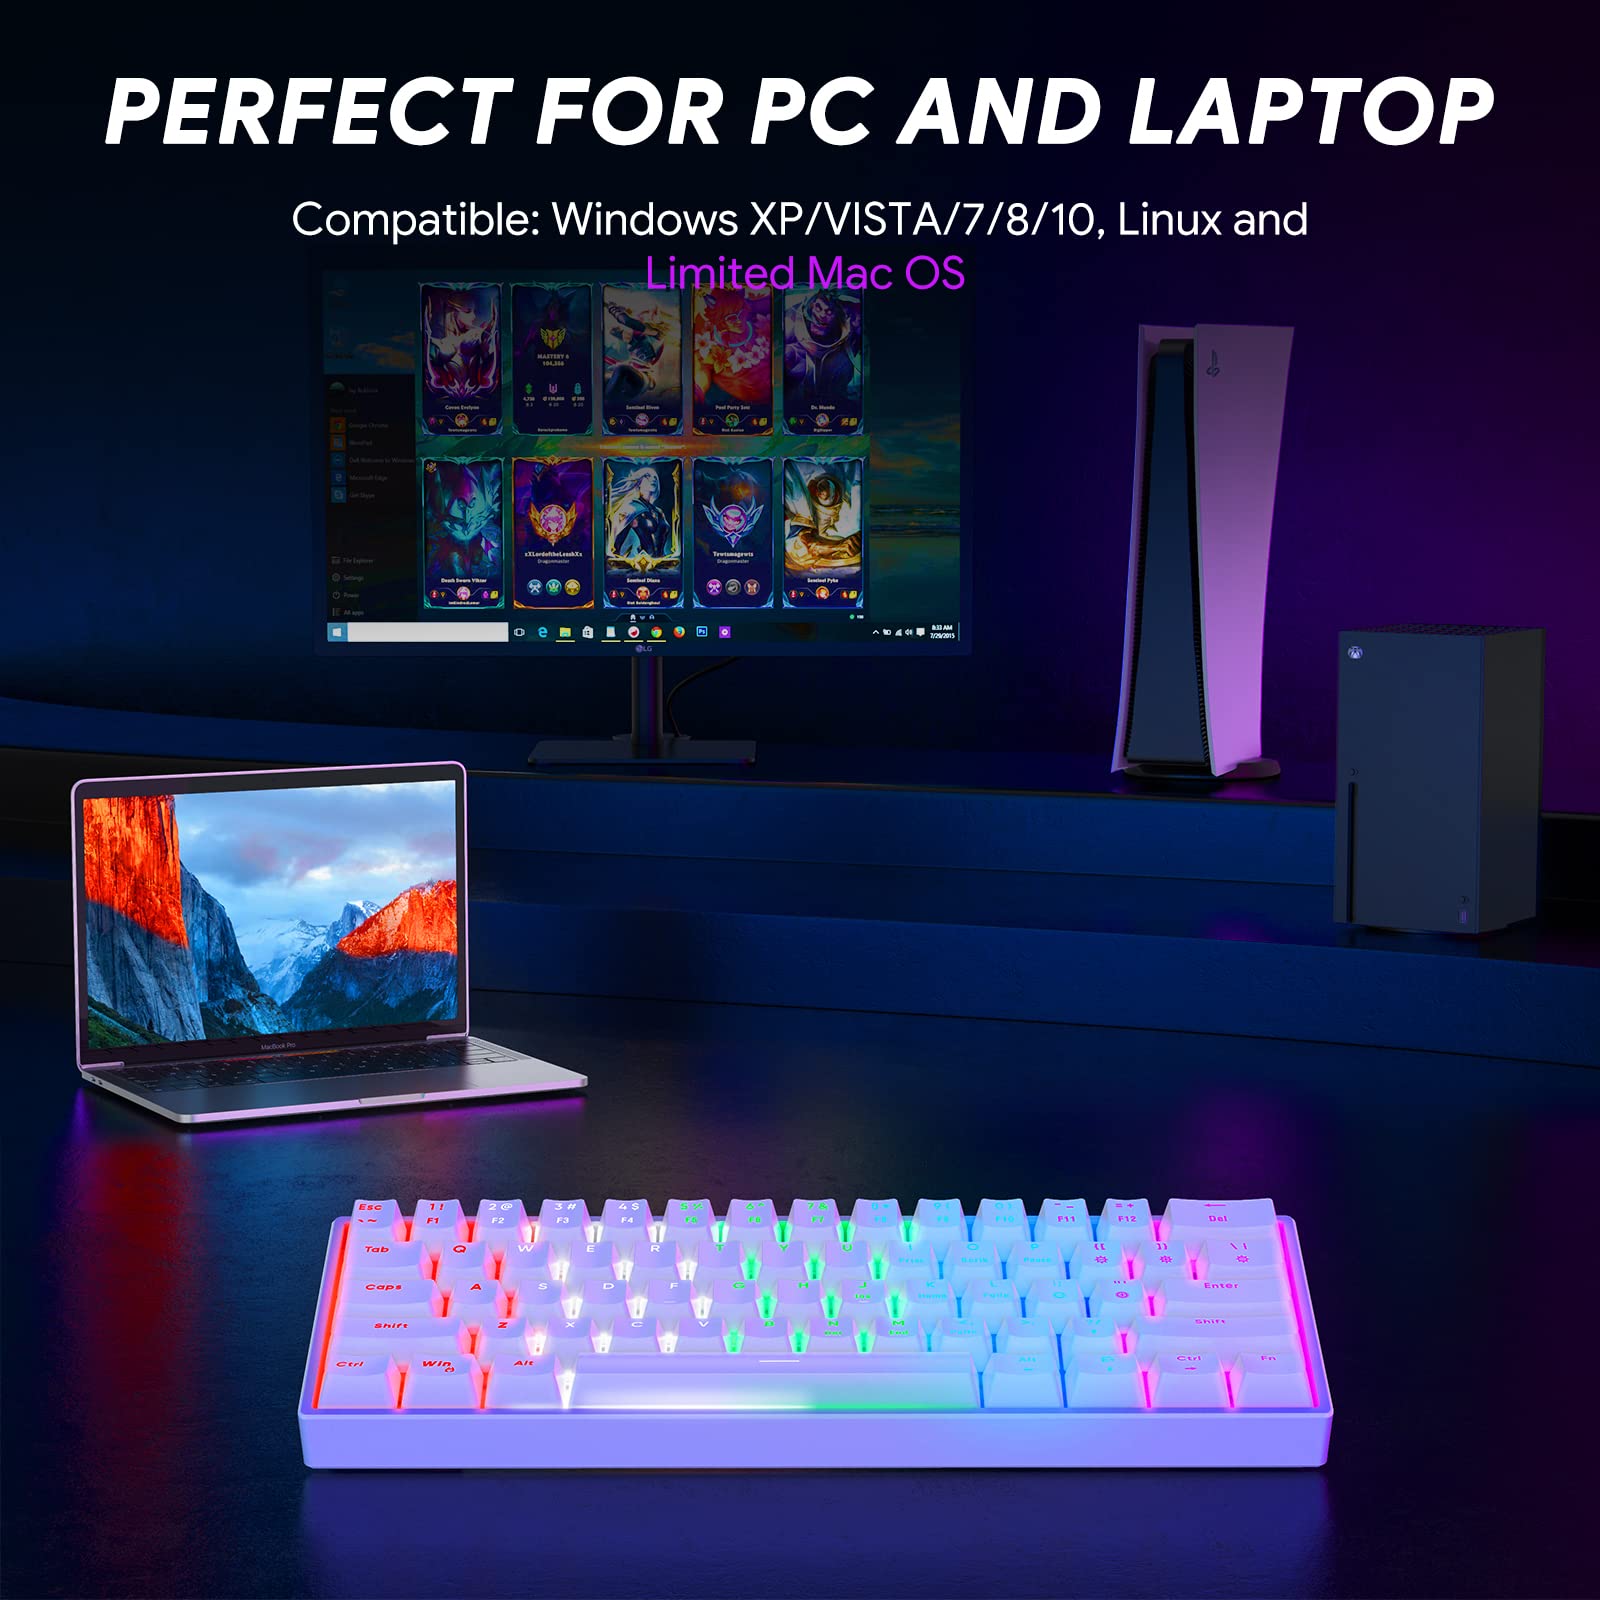 TECURS 60 Percent Gaming Keyboard Wired, White Light Up Mechanical Keyboard Mini 61 Key Compact Gamer Keyboard Clicky with Blue Switch for Computer PC Laptop